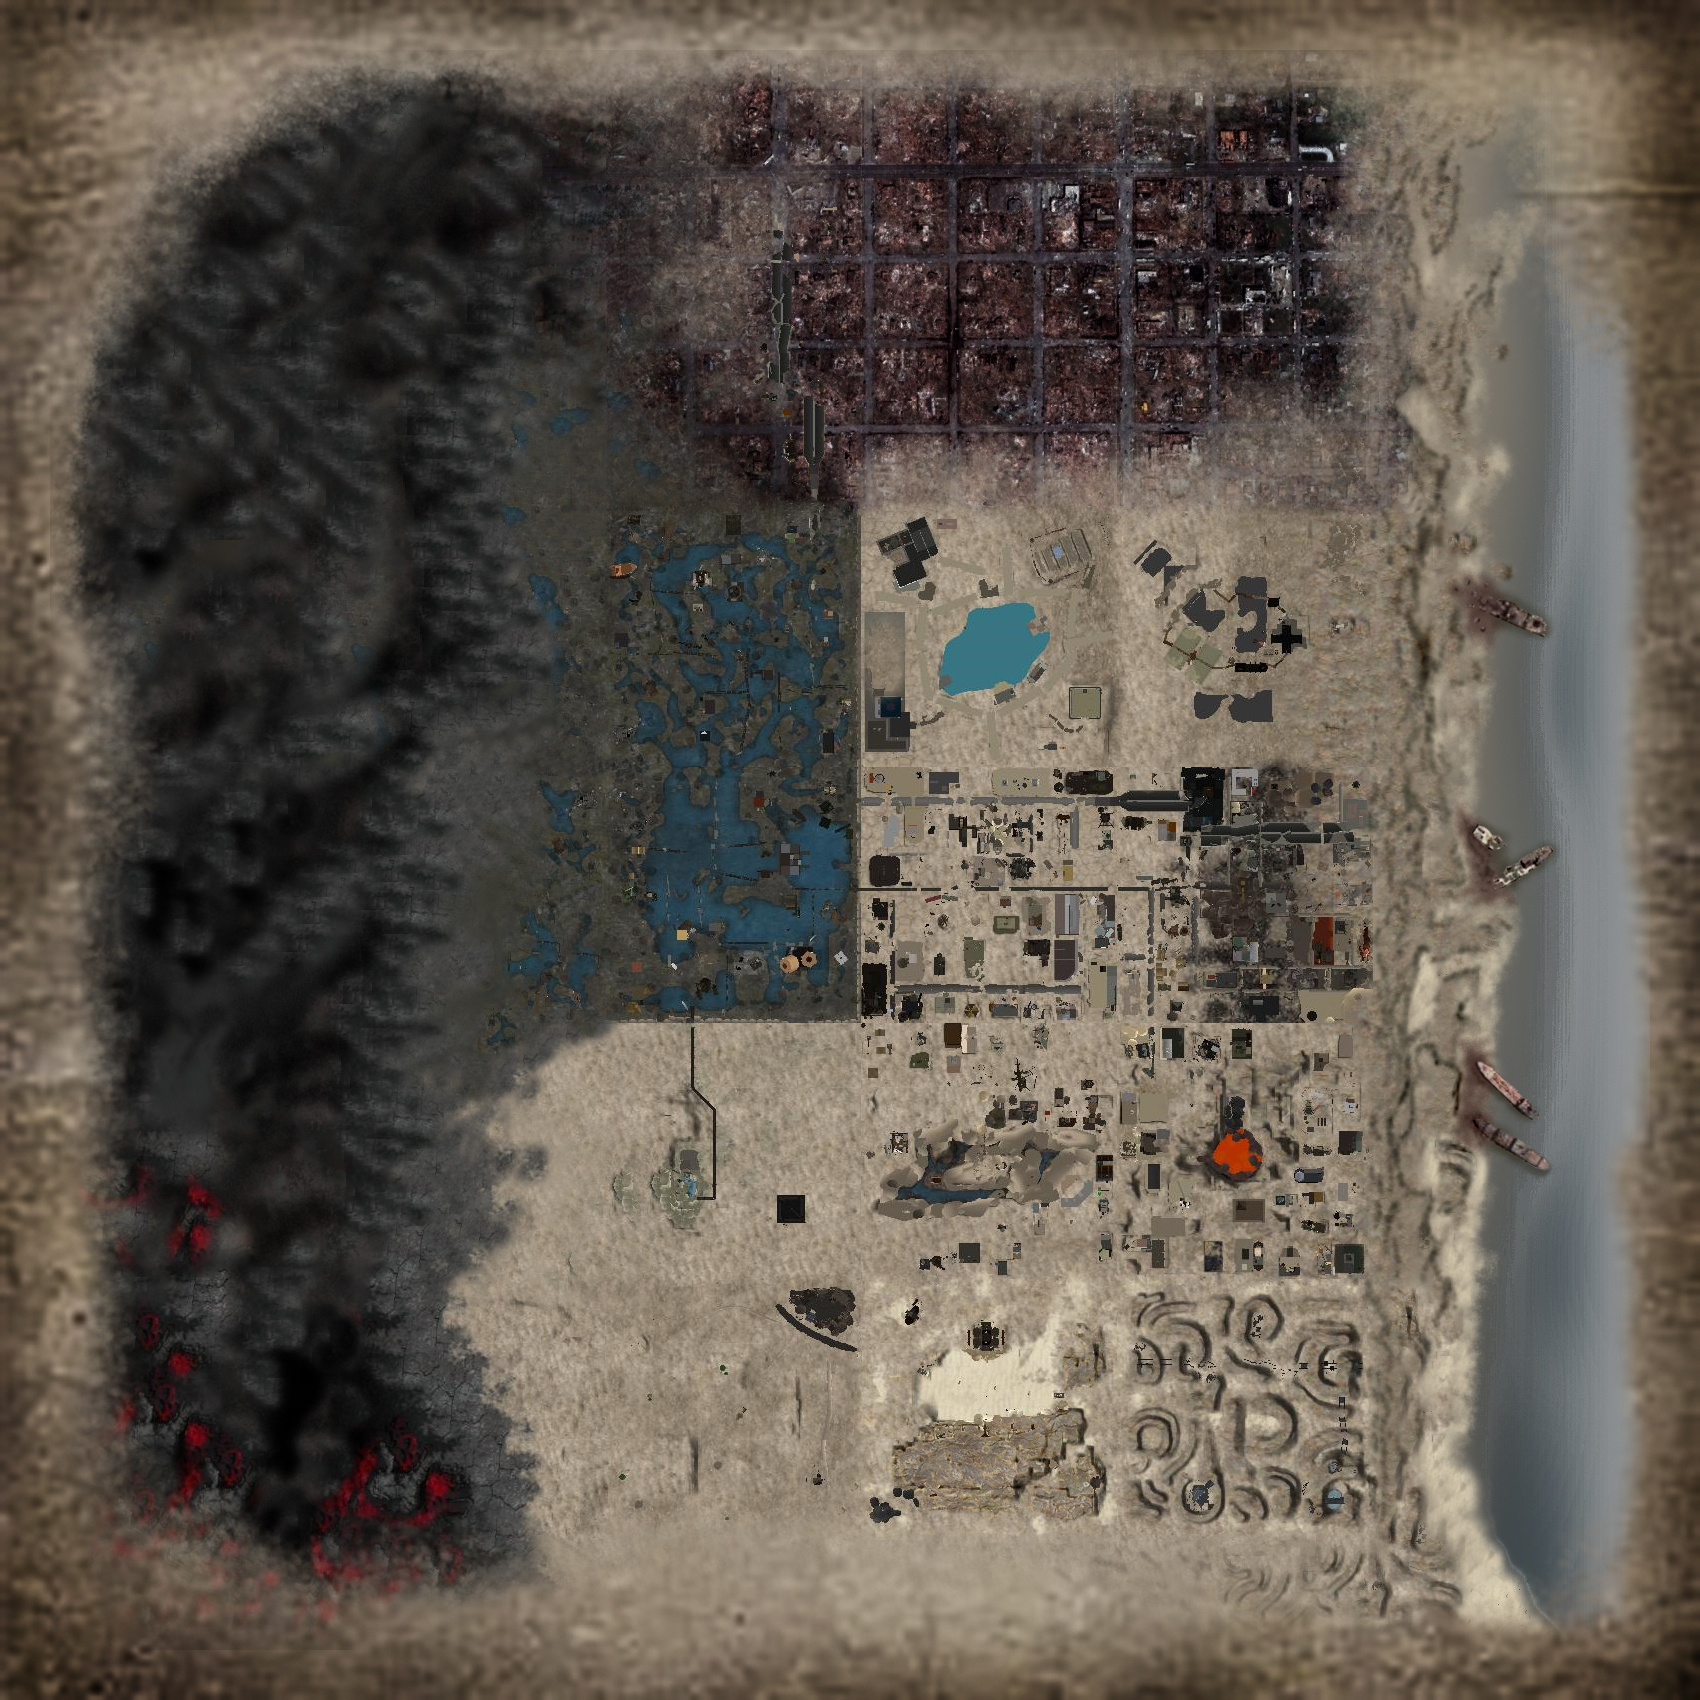 The Wastelands and Beyond? (Happy Birthday Wastelands!)